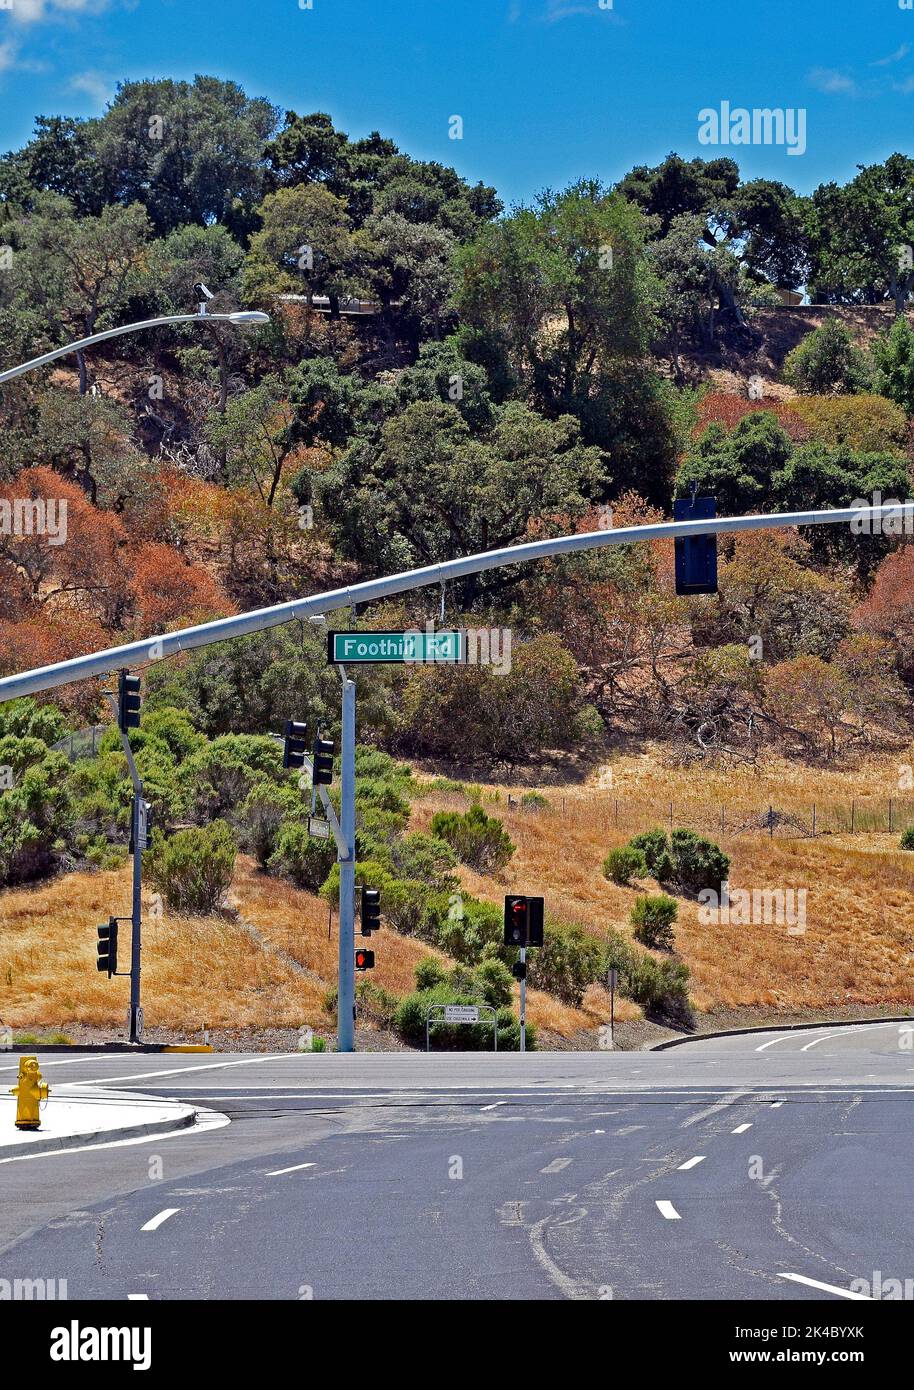 Foothill Road intersection in Pleasanton, California Stock Photo